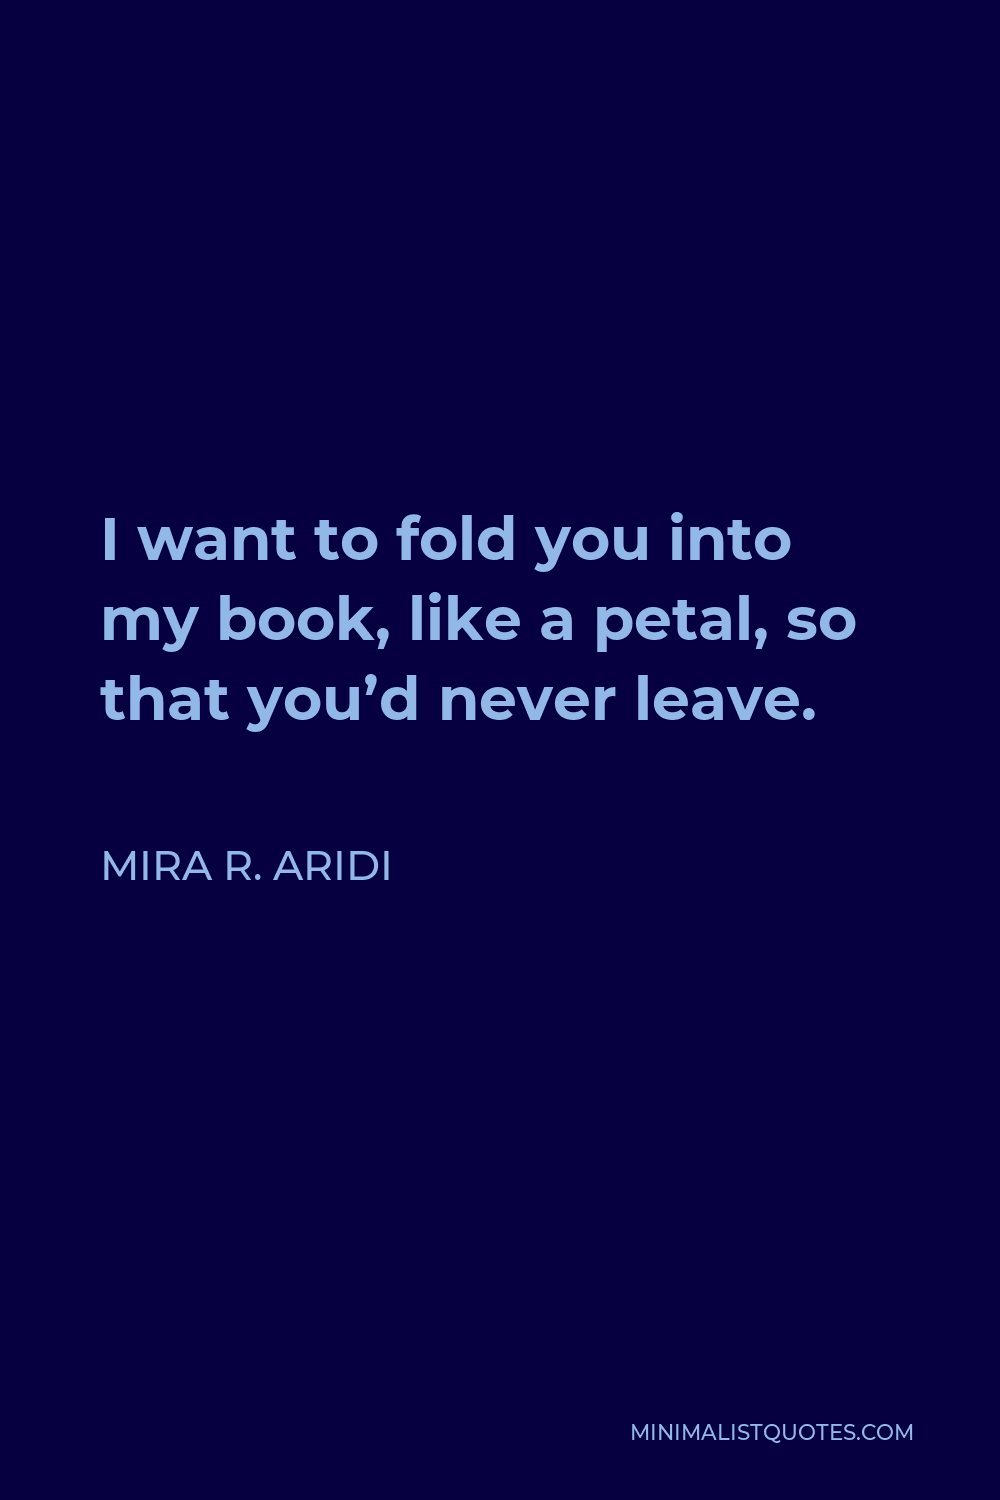 Mira R. Aridi Quote - I want to fold you into my book, like a petal, so that you’d never leave.